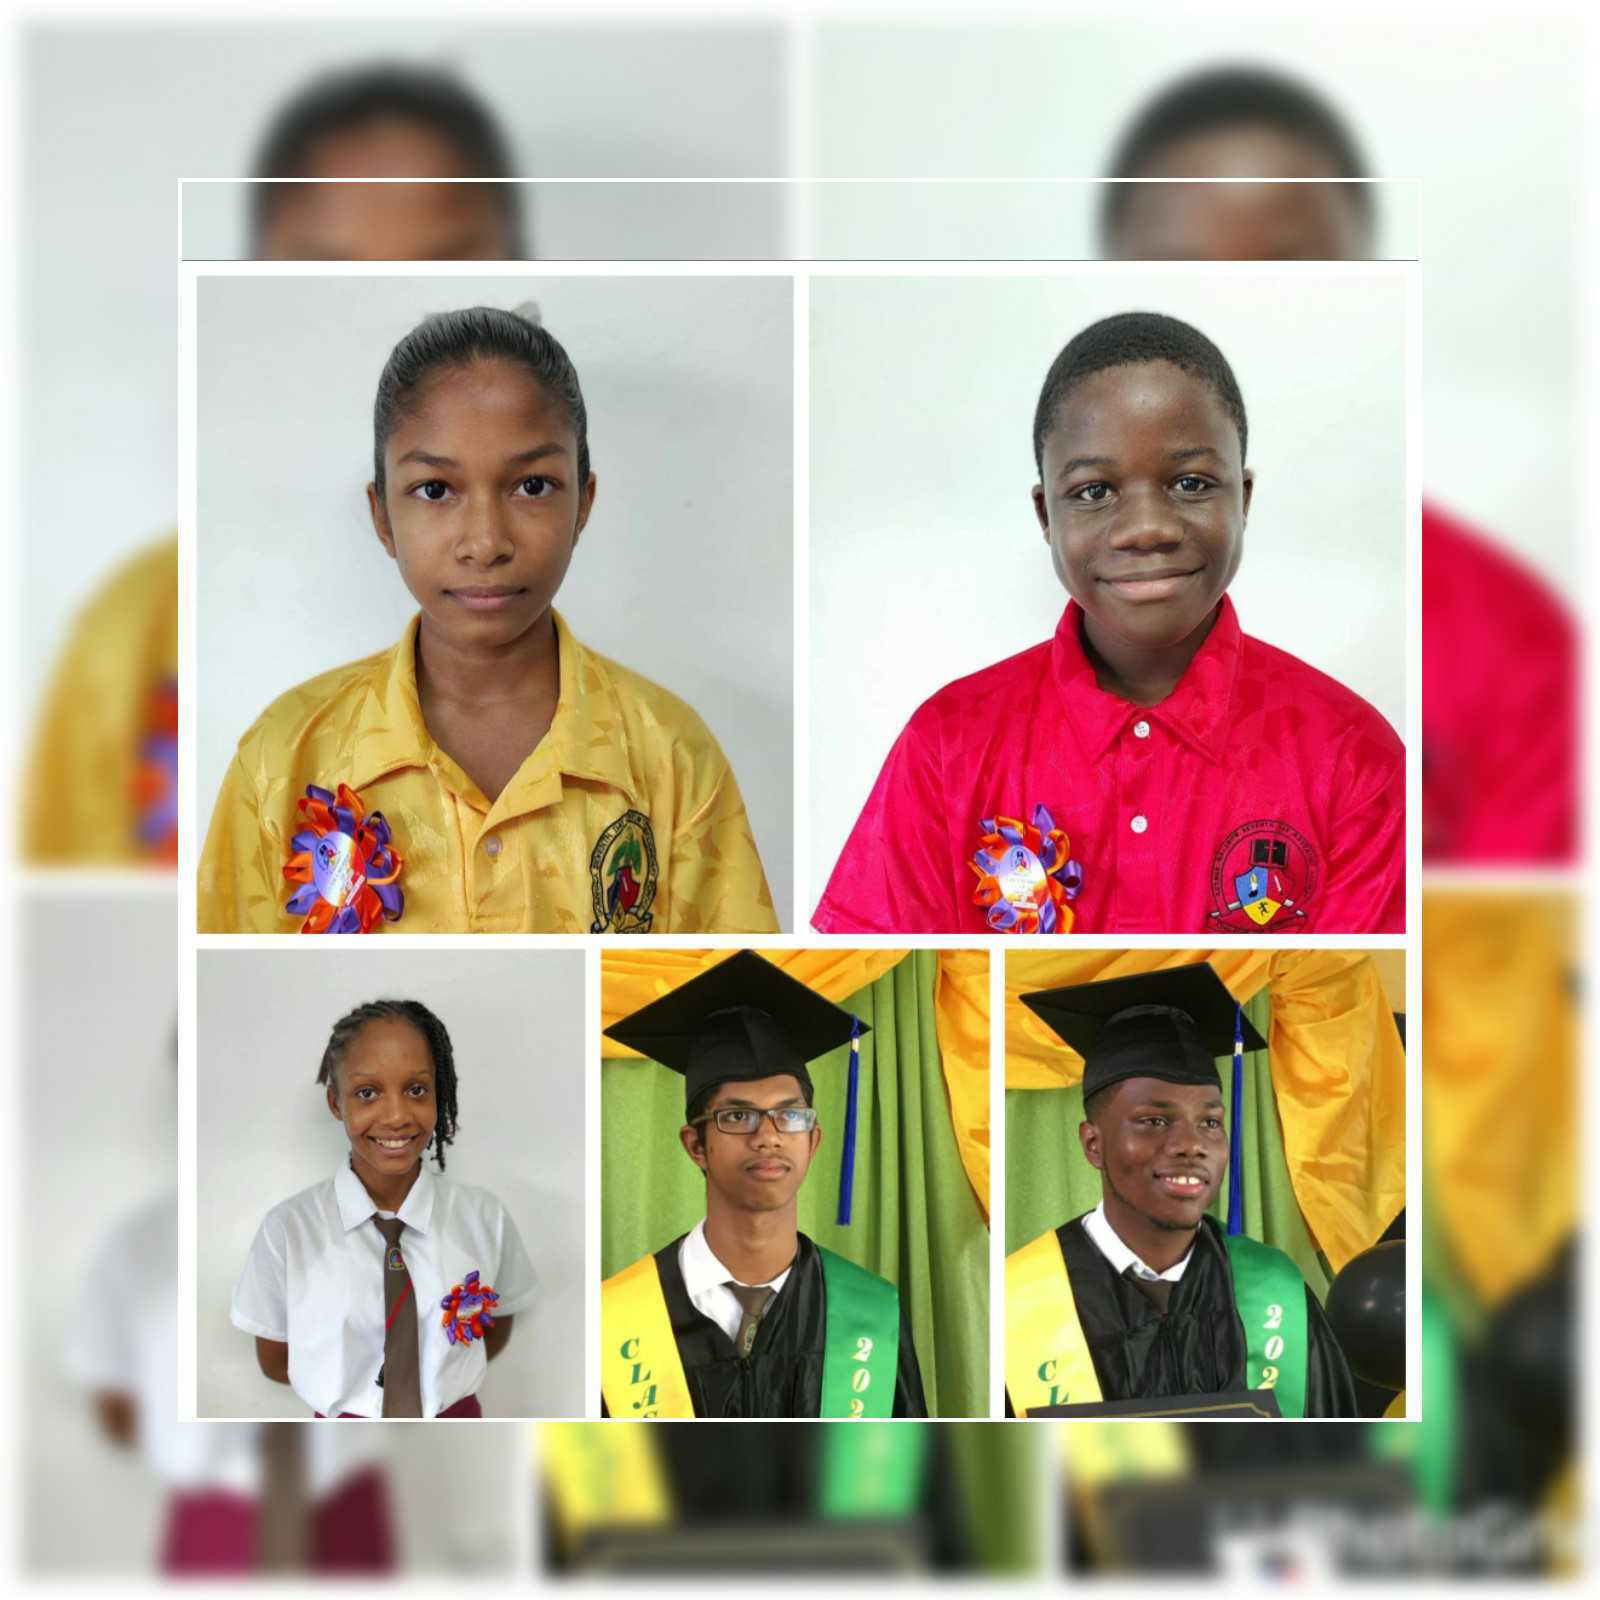 TOP PERFORMERS AT ARTHUR WALDRON SEVENTH-DAY ADVENTIST ACADEMY RECEIVES RECOGNITION